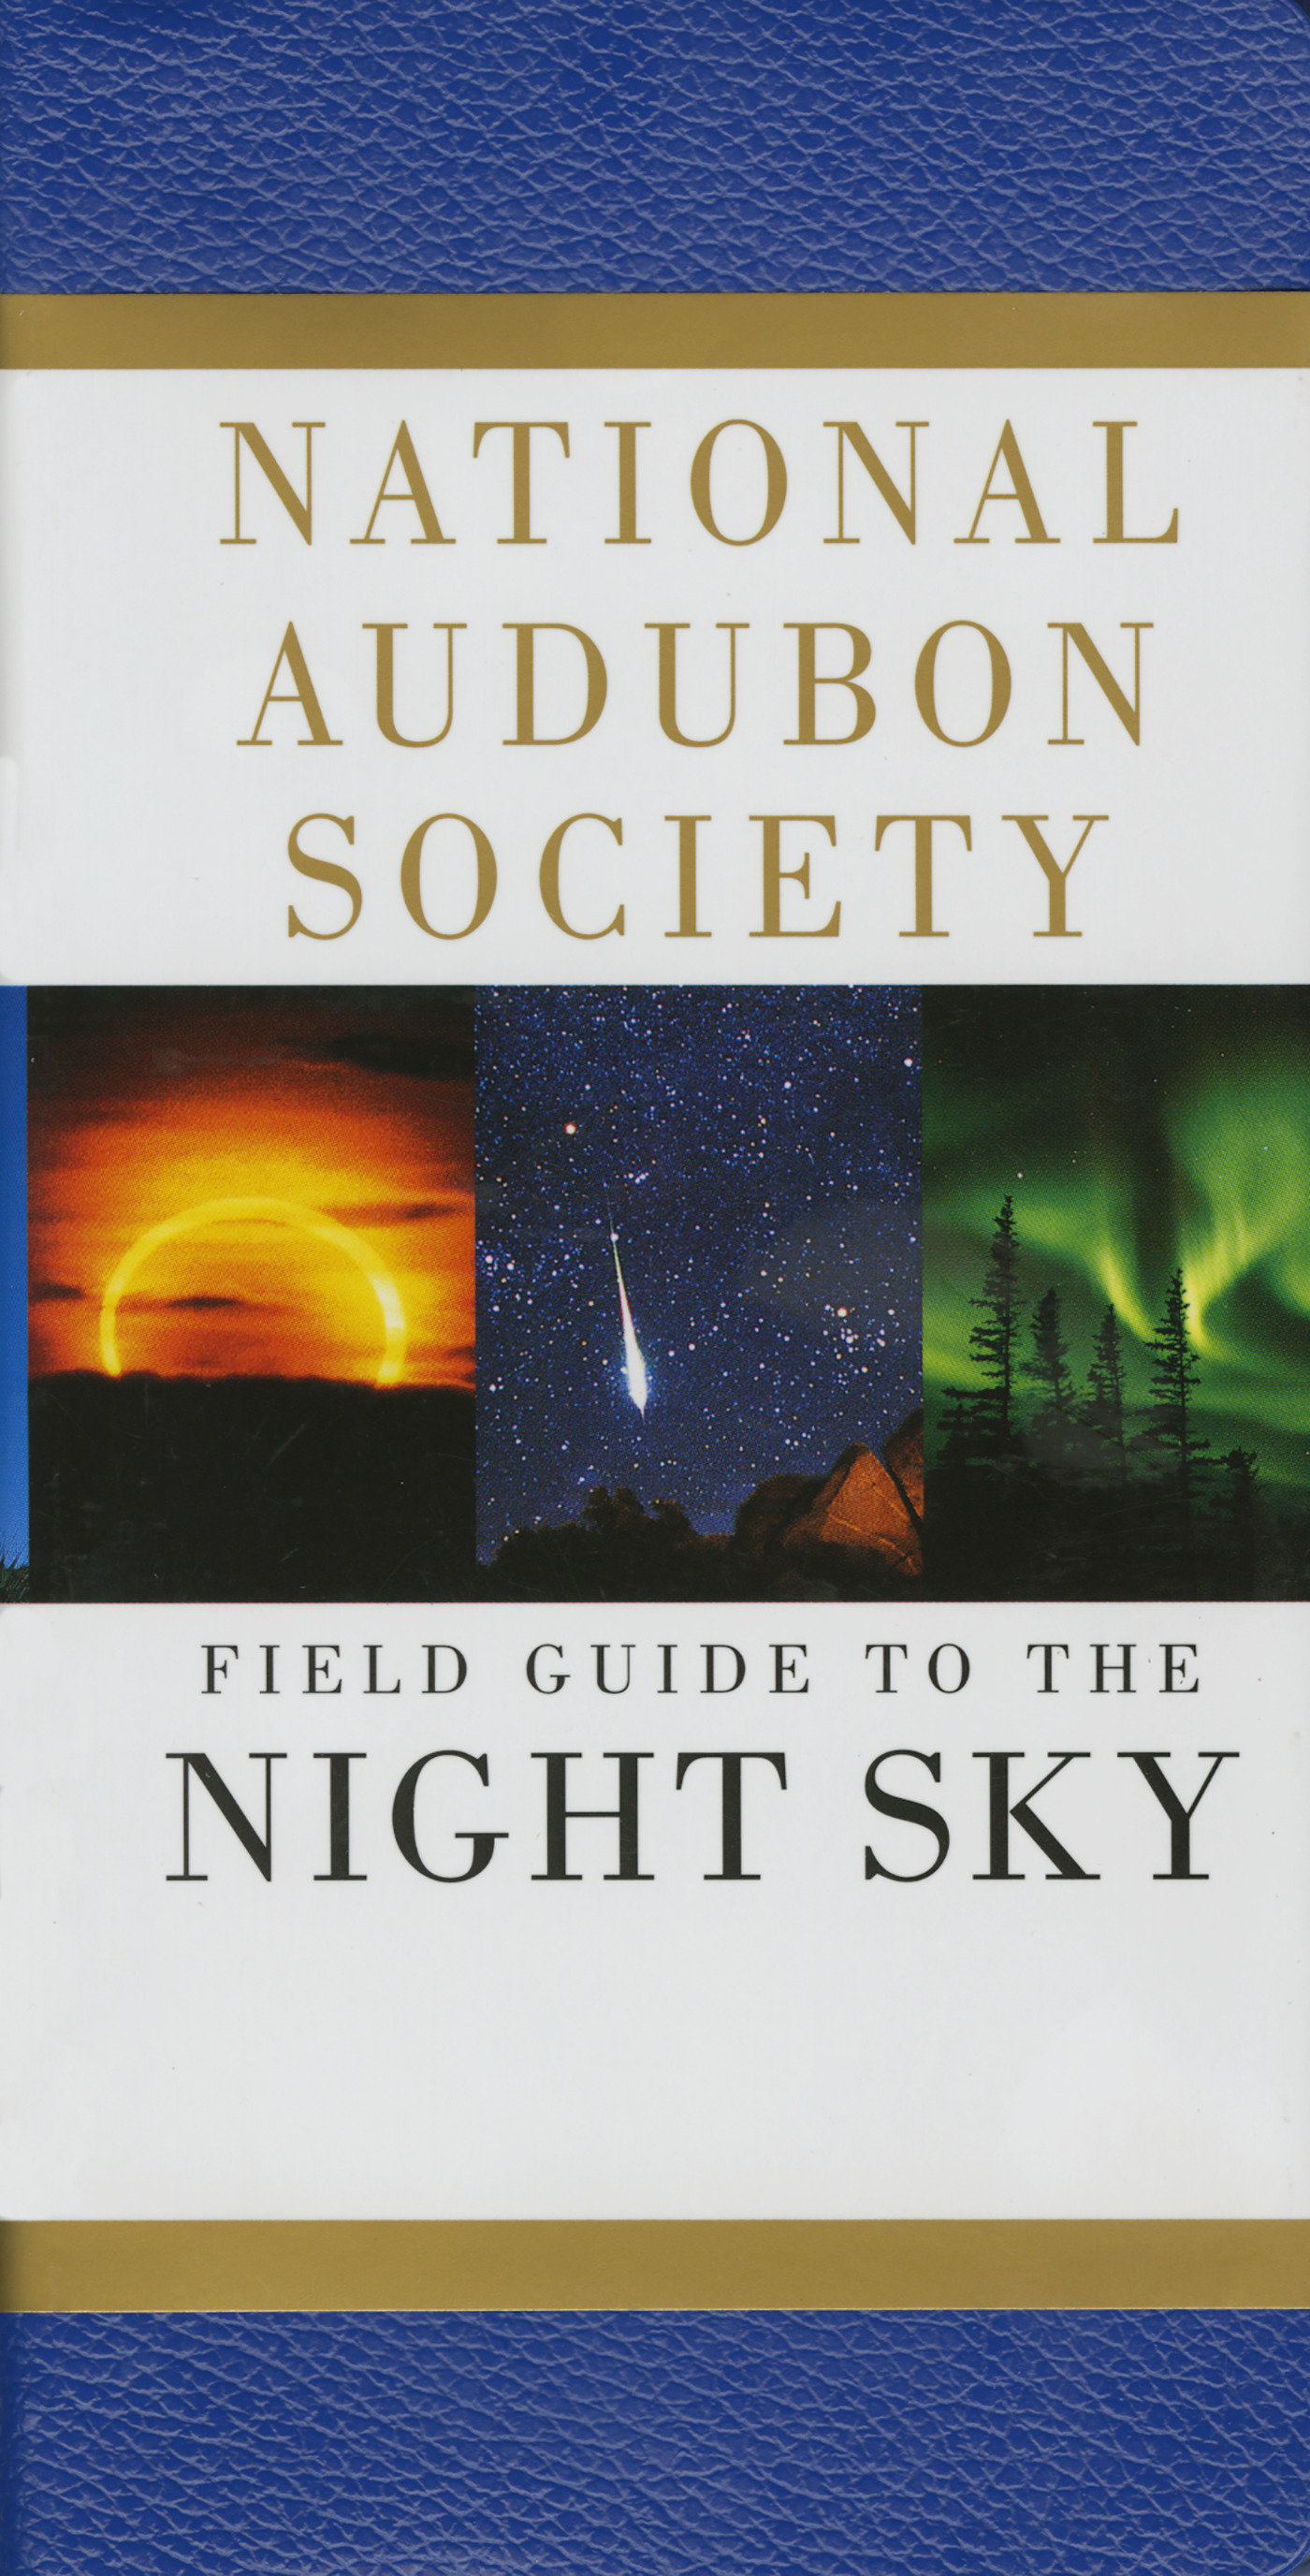 National Audubon Society Field Guide To The Night Sky (Hardcover Book)